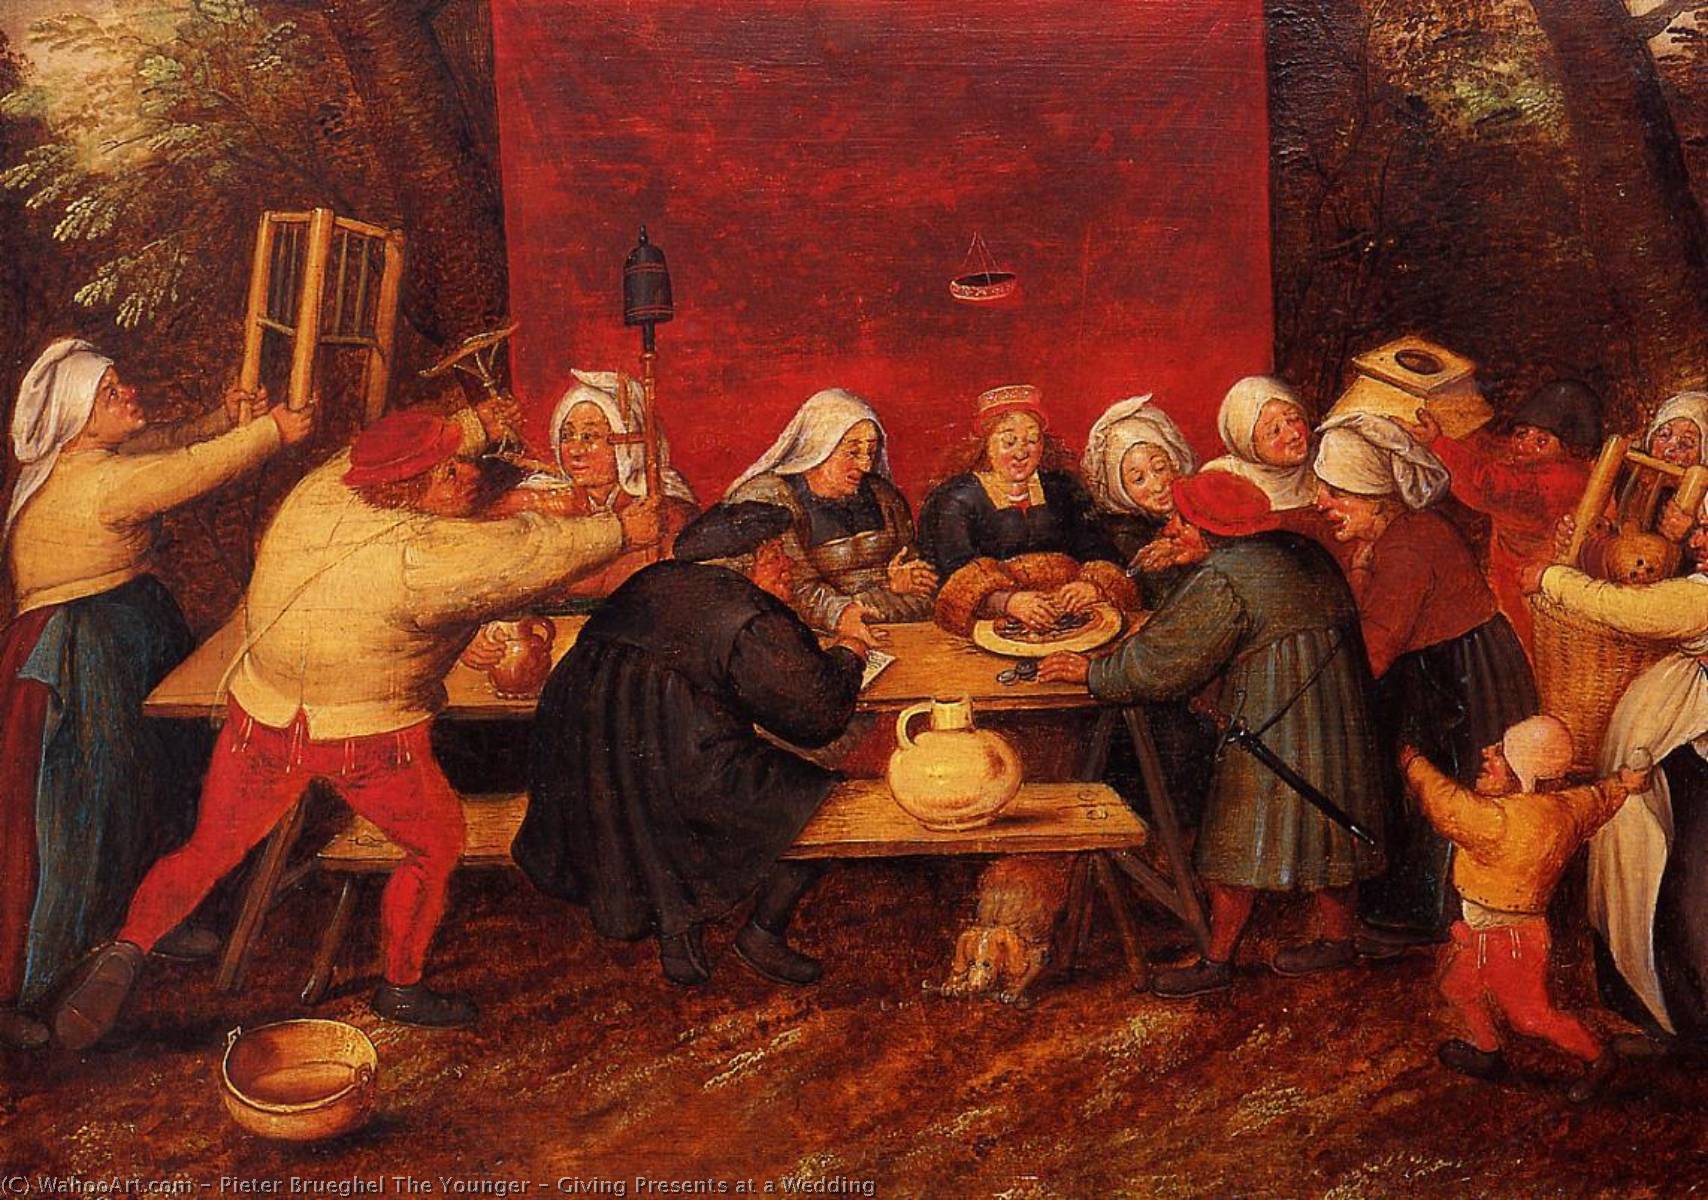 WikiOO.org - Encyclopedia of Fine Arts - Malba, Artwork Pieter Brueghel The Younger - Giving Presents at a Wedding